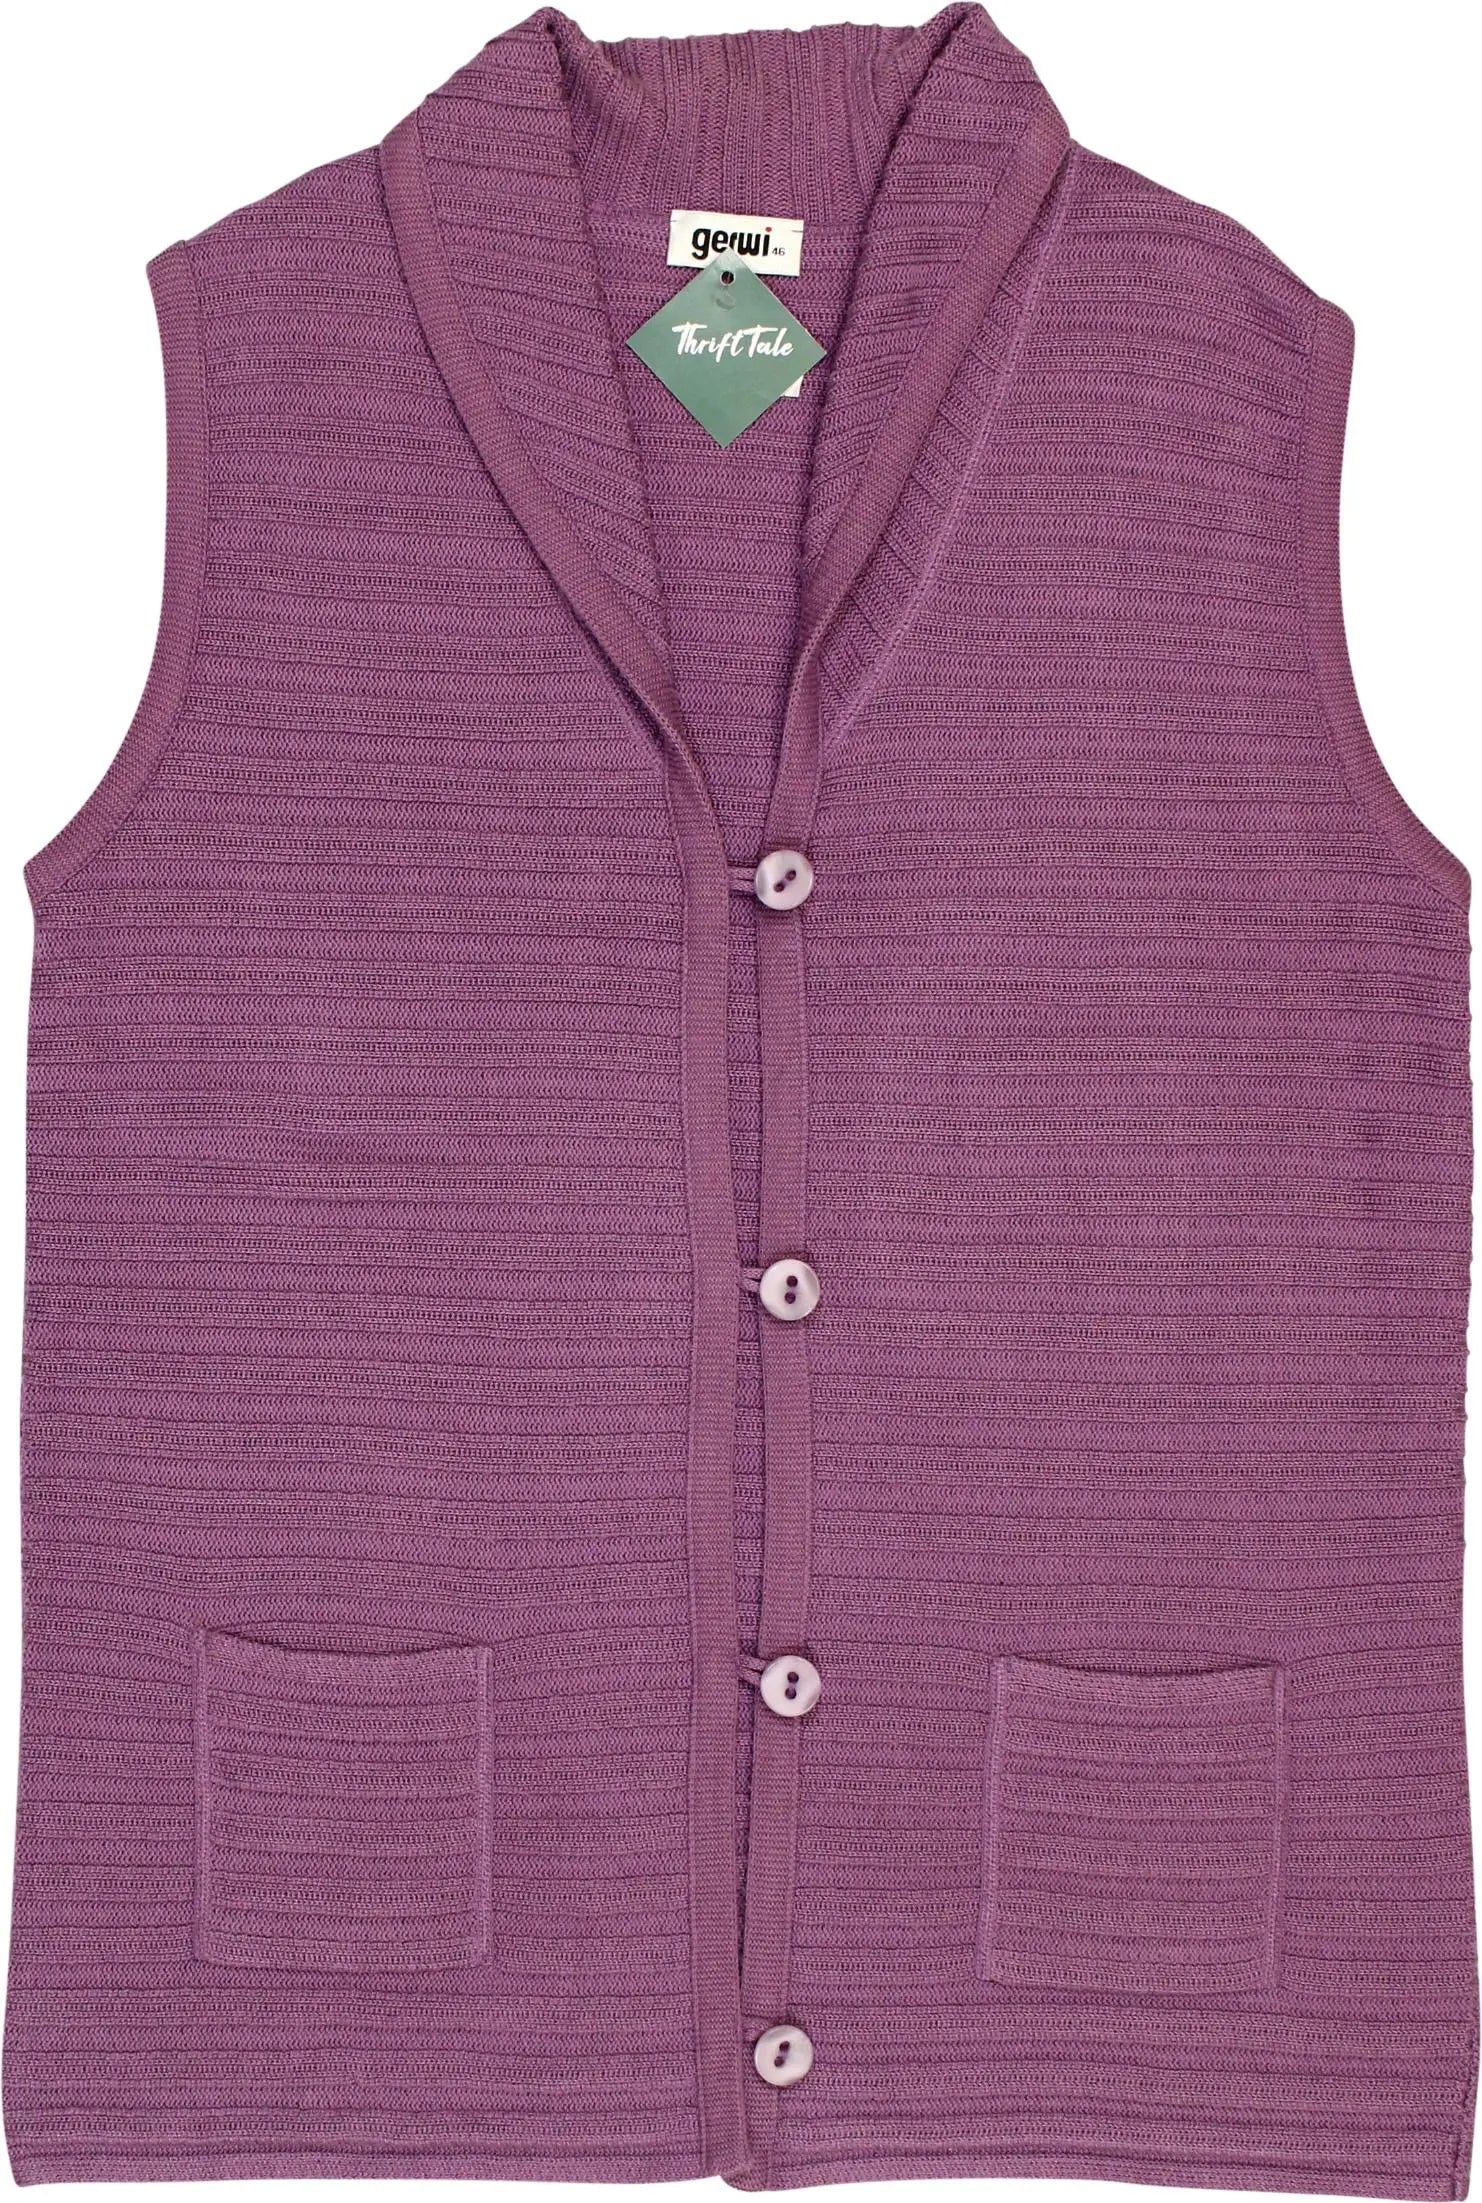 Gerwi - Knitted Vest- ThriftTale.com - Vintage and second handclothing